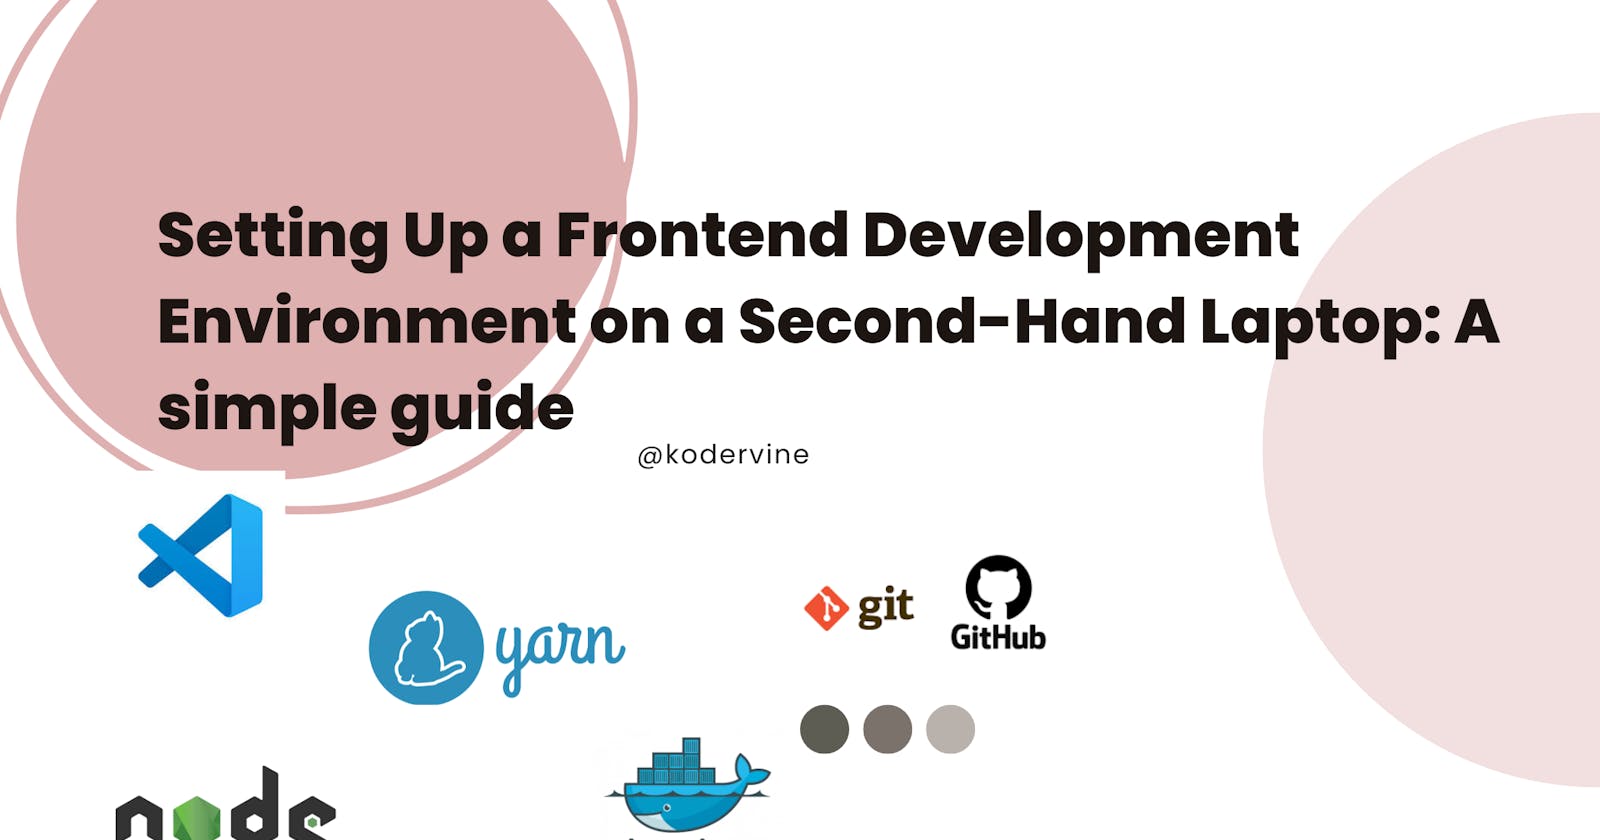 Setting Up a Frontend Development Environment on a Second-Hand Laptop: A simple guide